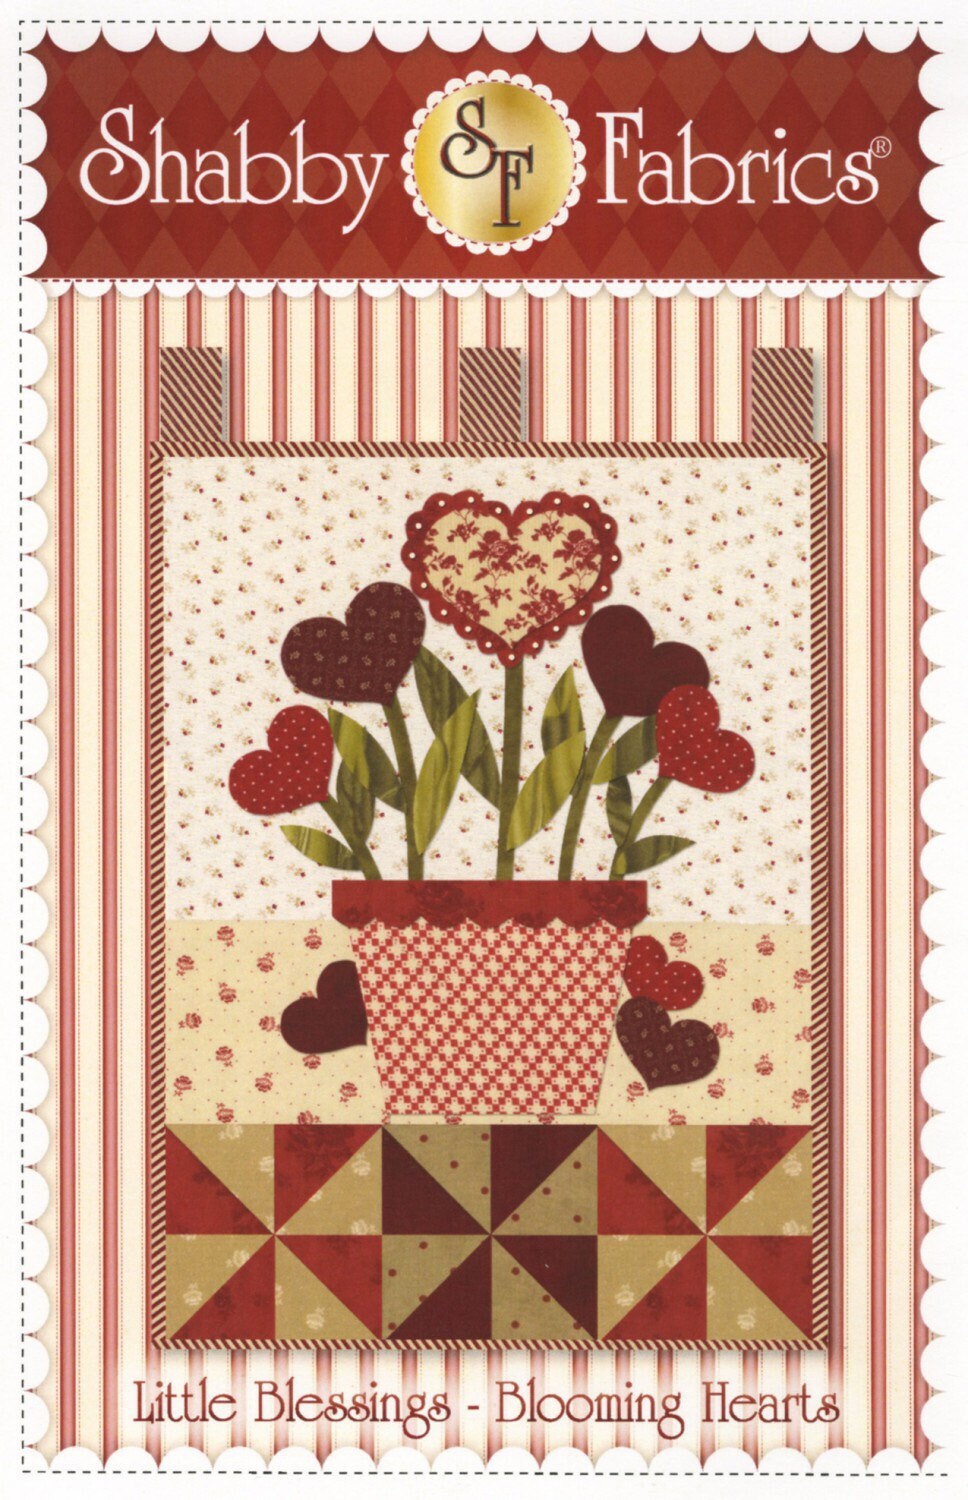 Little Blessings Blooming Hearts Quilt Pattern - Shabby Fabrics - Jennifer Bosworth - Heart Quilt Pattern - Valentines Day Quilt Pattern